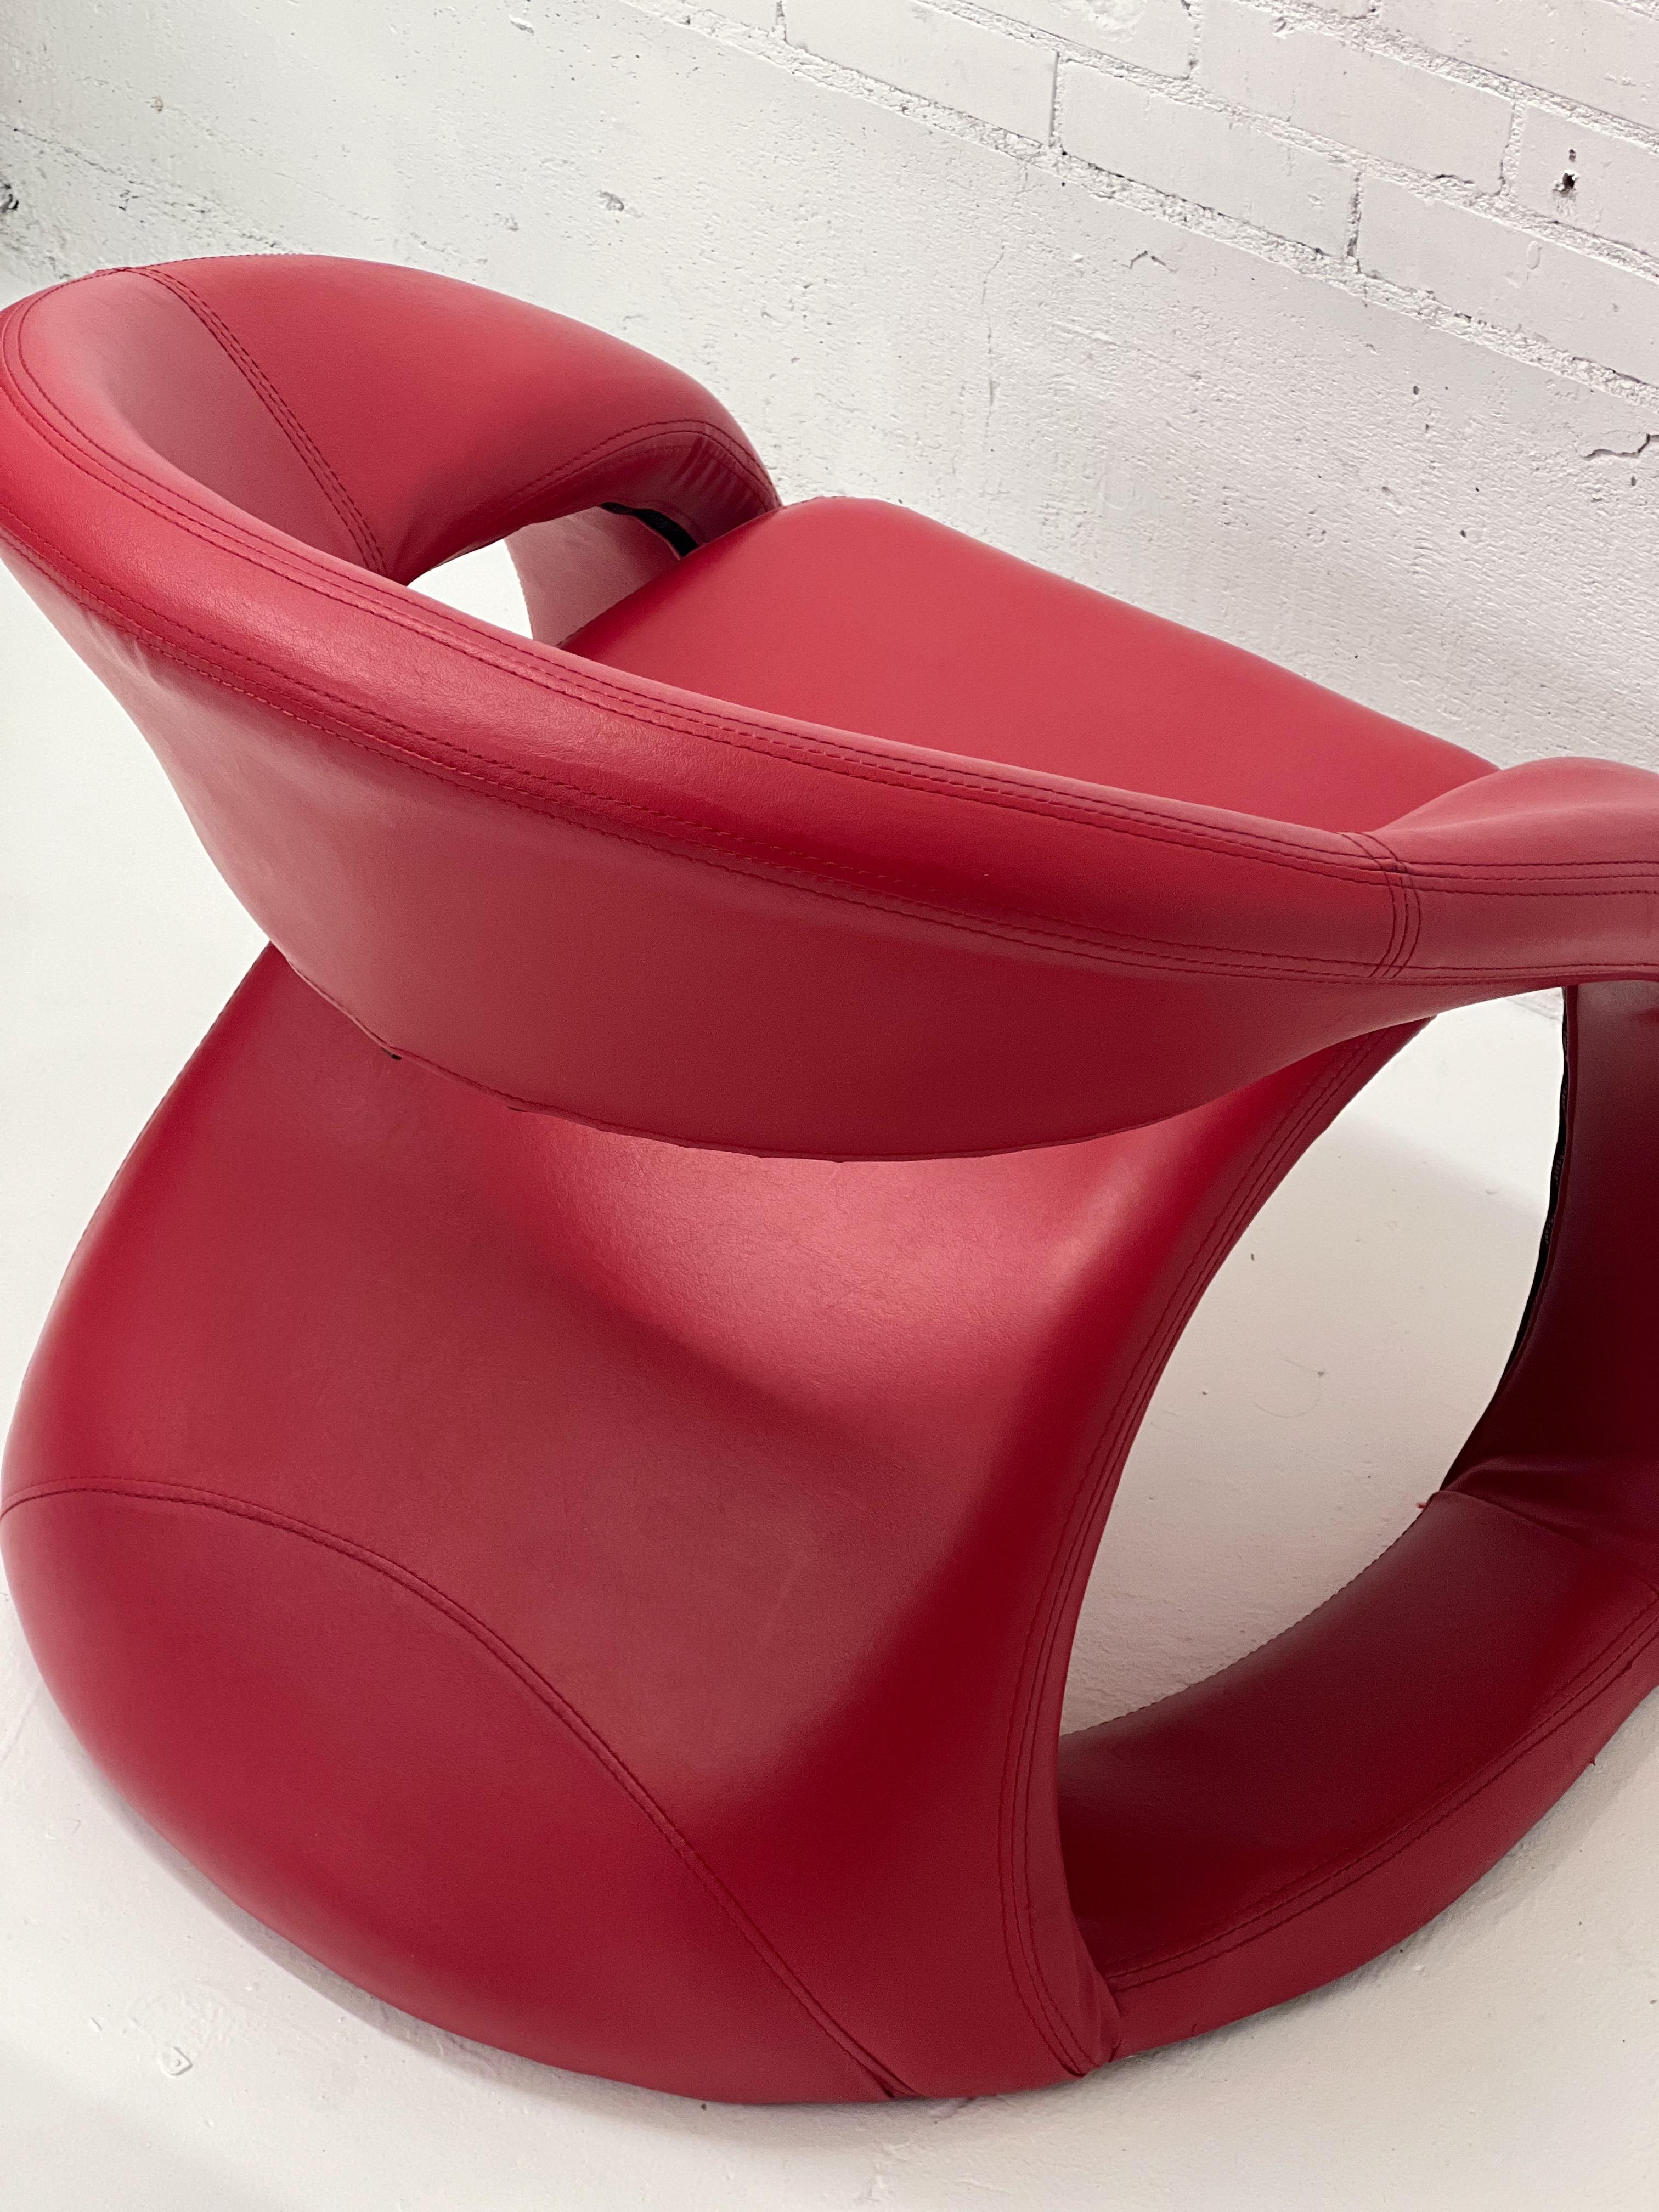 Vintage 1980's bright red pop art tongue chair attributed to Jaymar. The sculptural pop of red with all the right curves to complete your primary color set. There's not a bad angle on it. Extremely comfortable, it passes the 